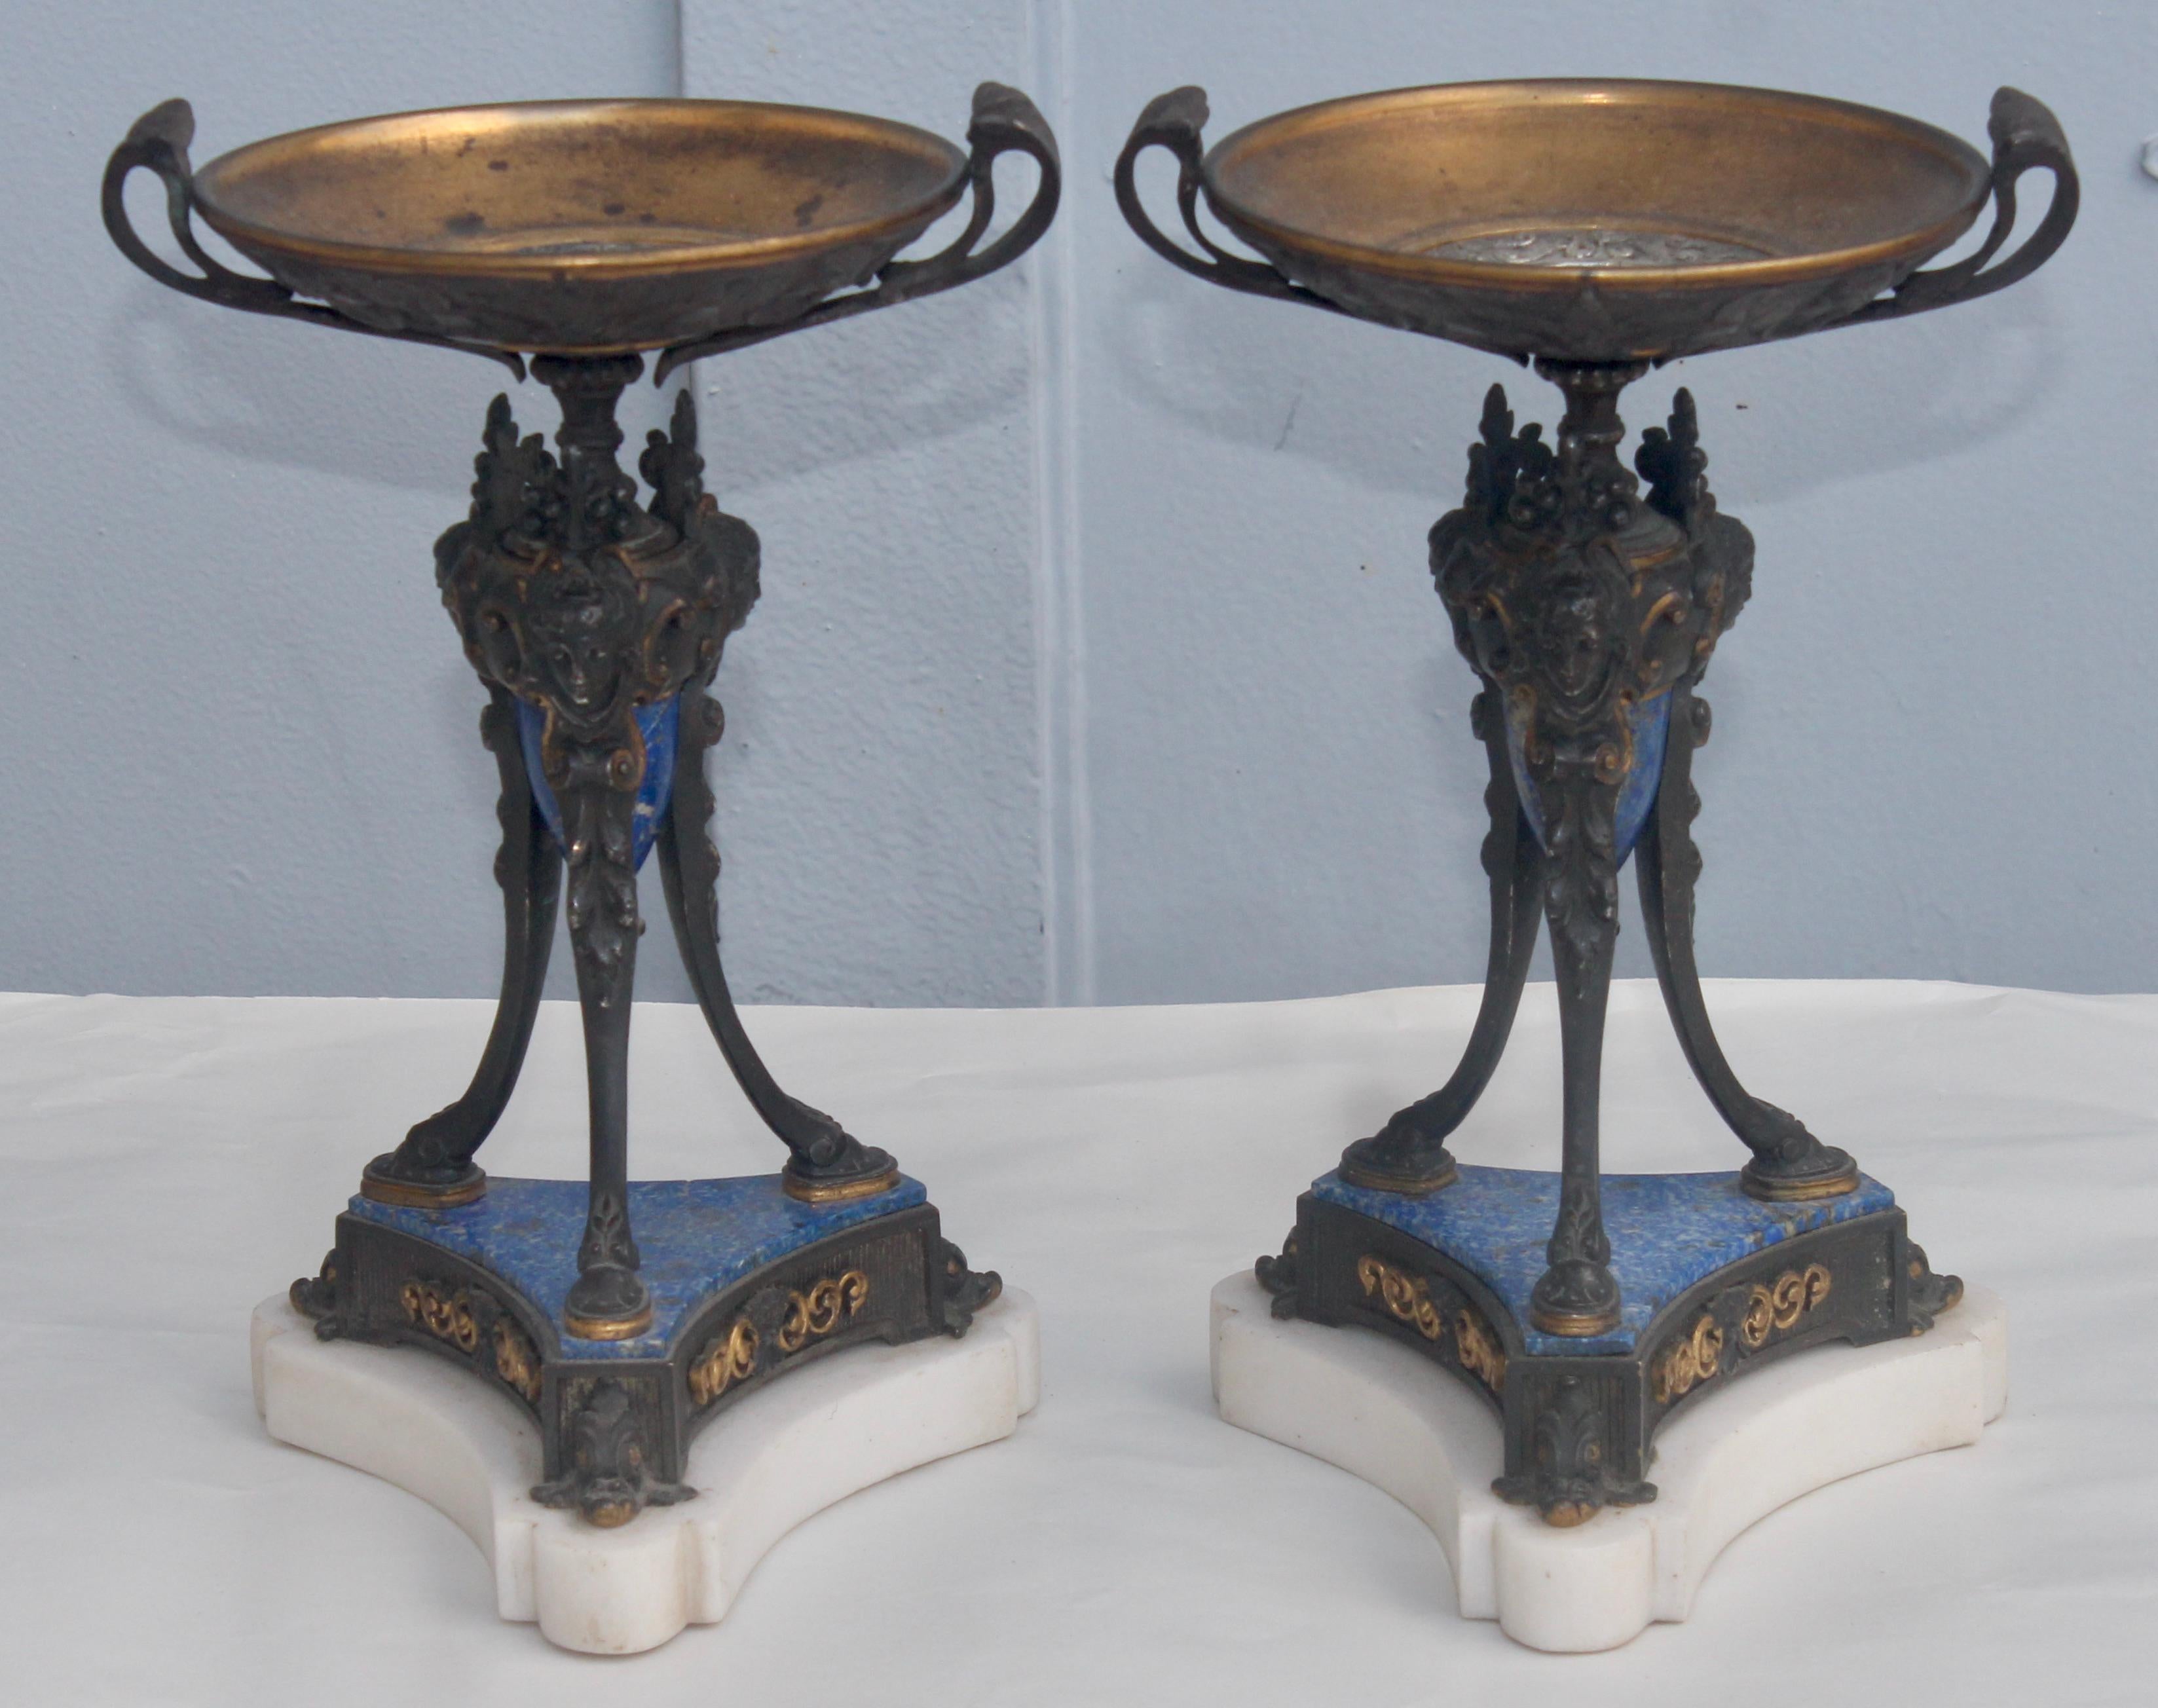 A French 19th century pair of neoclassical tripod tazzas
Ormolu, patinated bronze and Lapis-lazuli on a white marble base
circa 1860.